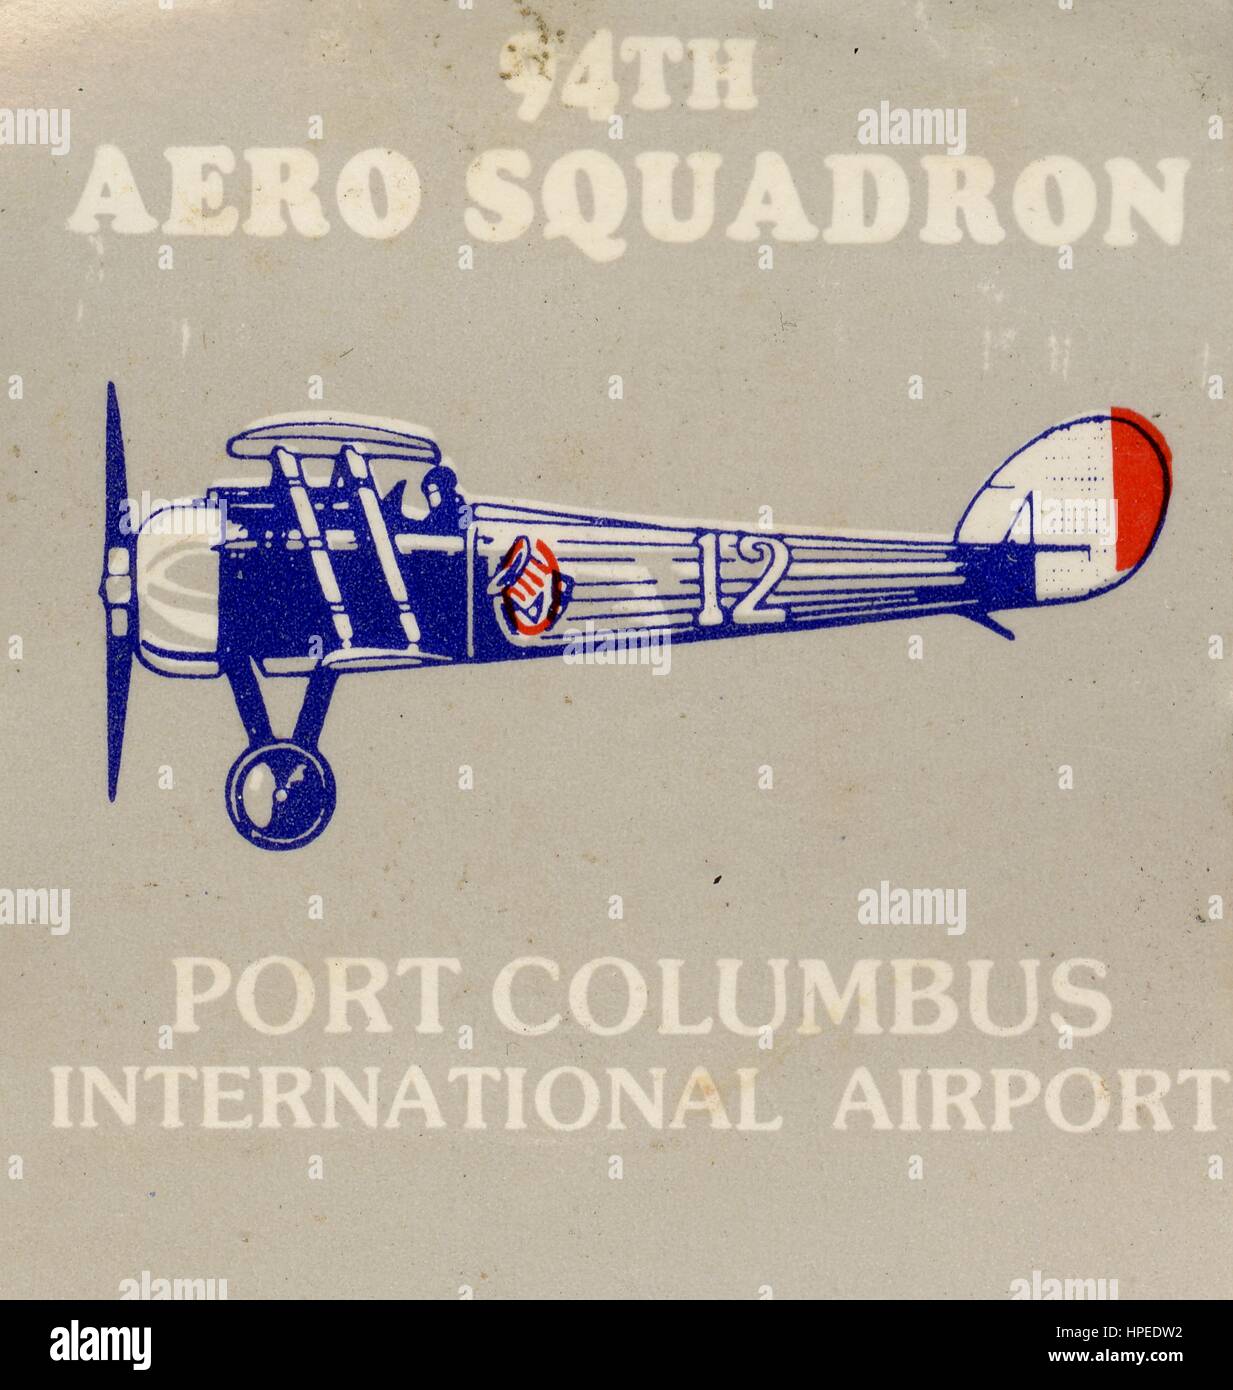 Matchbook cover image for 94th Aero Squadron restaurant at Port Columbus International Airport, now John Glenn Columbus International Airport, Columbus, Ohio, featuring an image of a byplane, 1975. Stock Photo